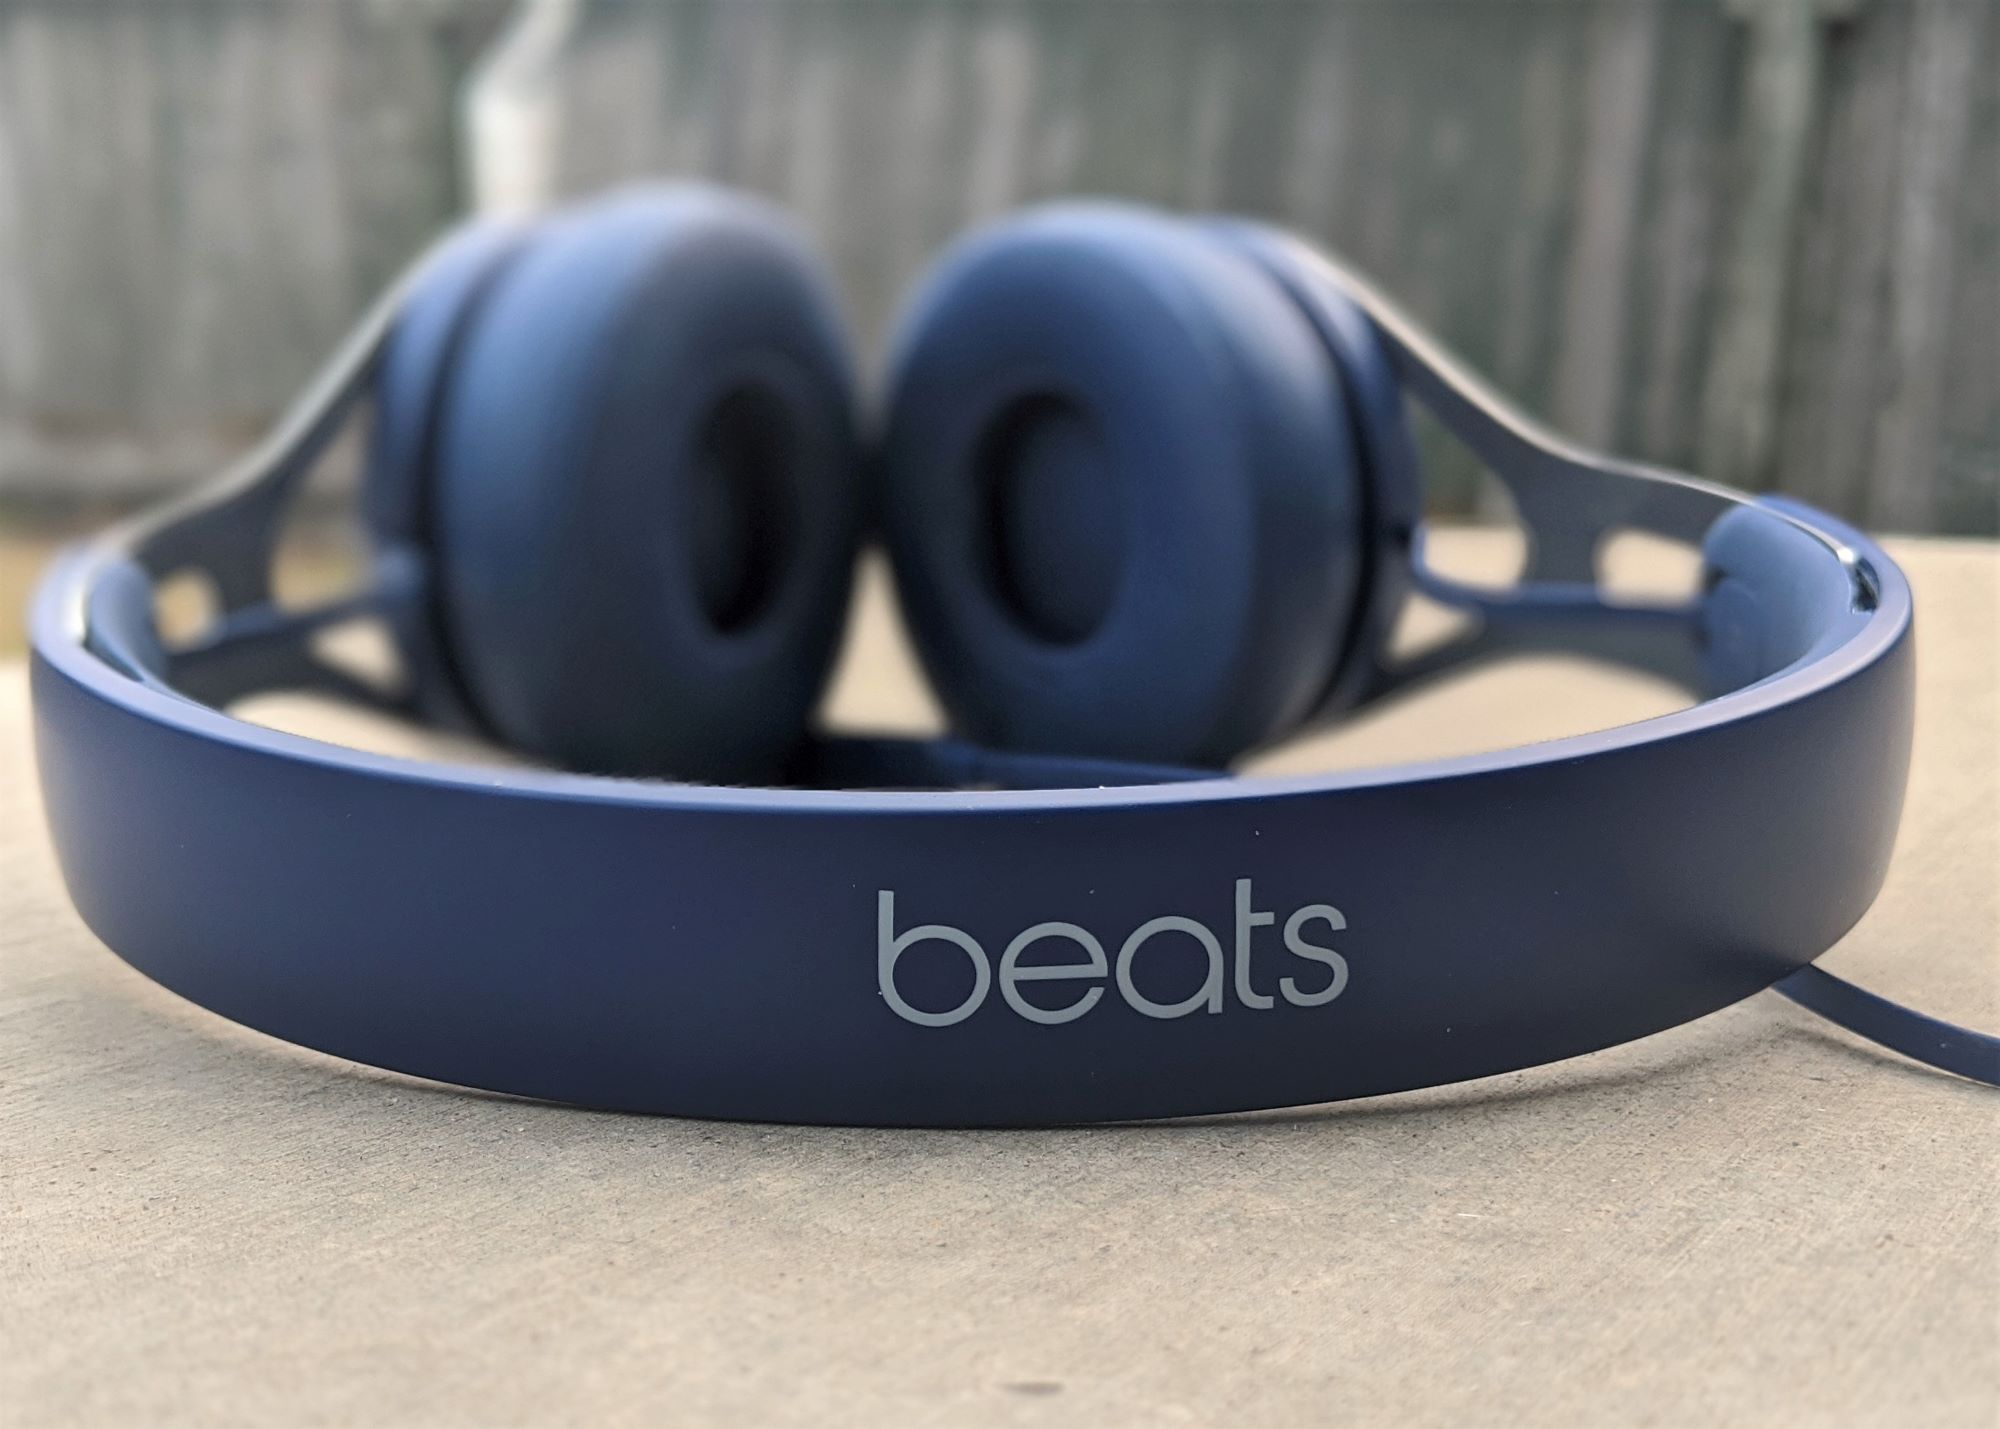 Beats Review: Good Sound Trapped By Limitations | Digital Trends